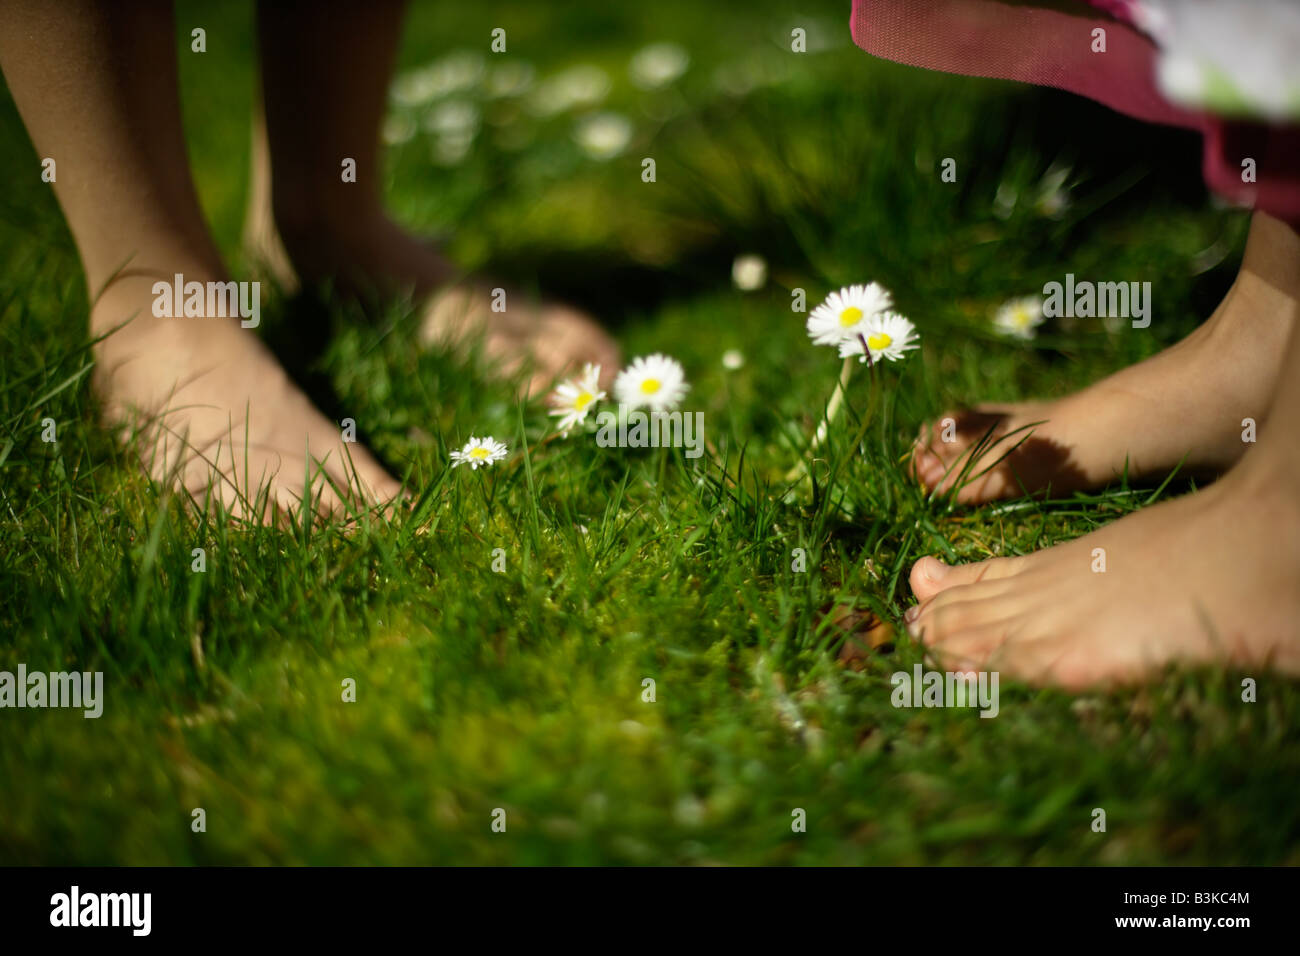 Six year old boy stands barefoot amongst daisies in lawn with his five year old sister Stock Photo